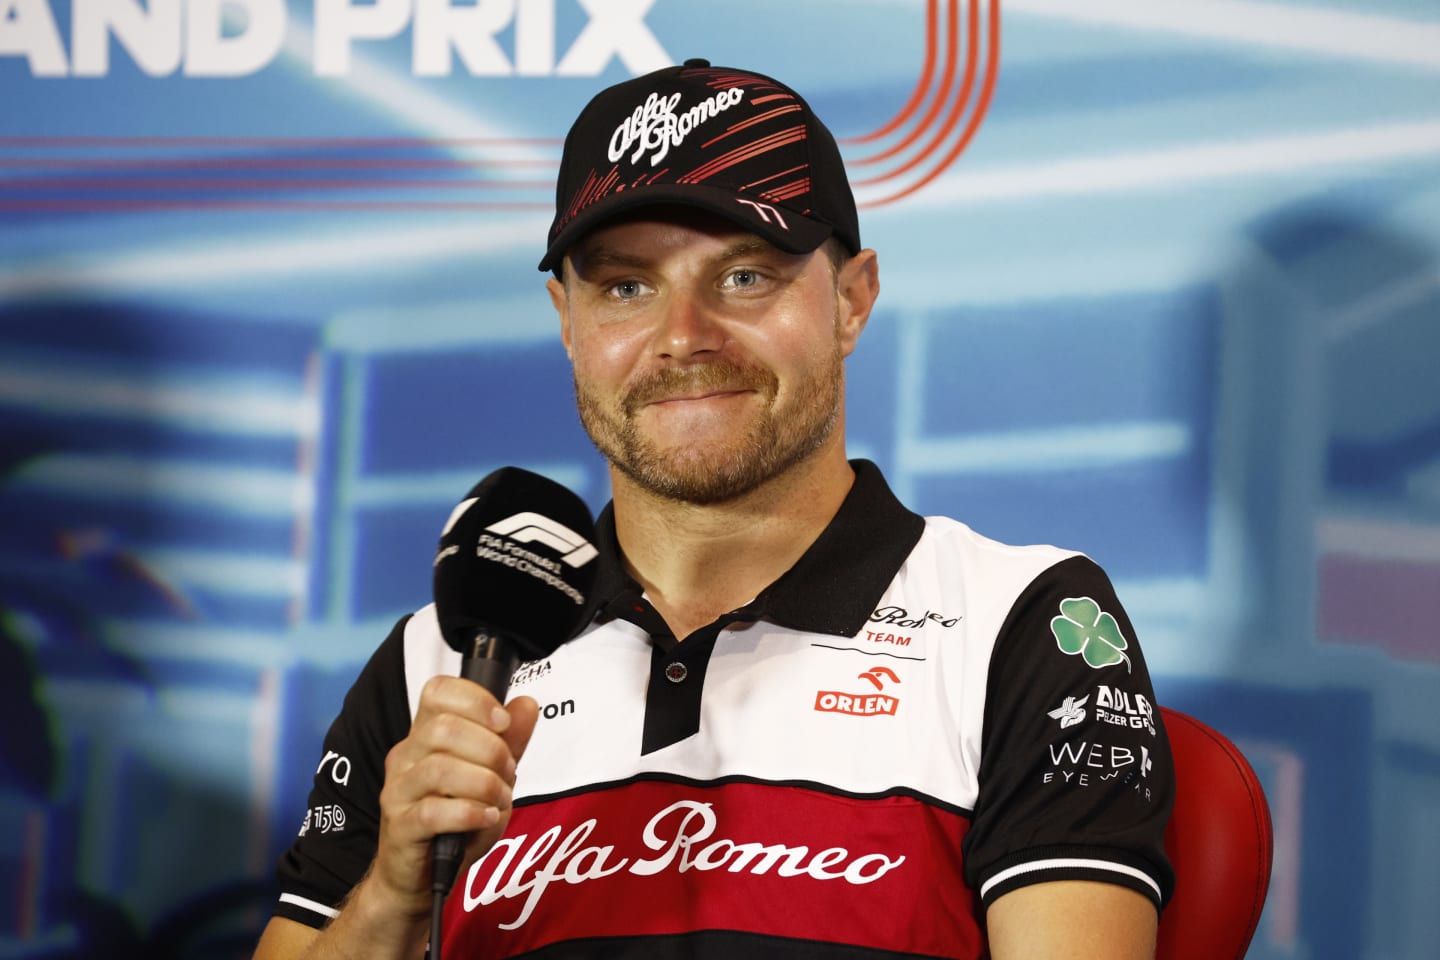 MIAMI, FLORIDA - MAY 06: Valtteri Bottas of Finland and Alfa Romeo F1 talks in the Drivers Press Conference prior to practice ahead of the F1 Grand Prix of Miami at the Miami International Autodrome on May 06, 2022 in Miami, Florida. (Photo by Jared C. Tilton/Getty Images)